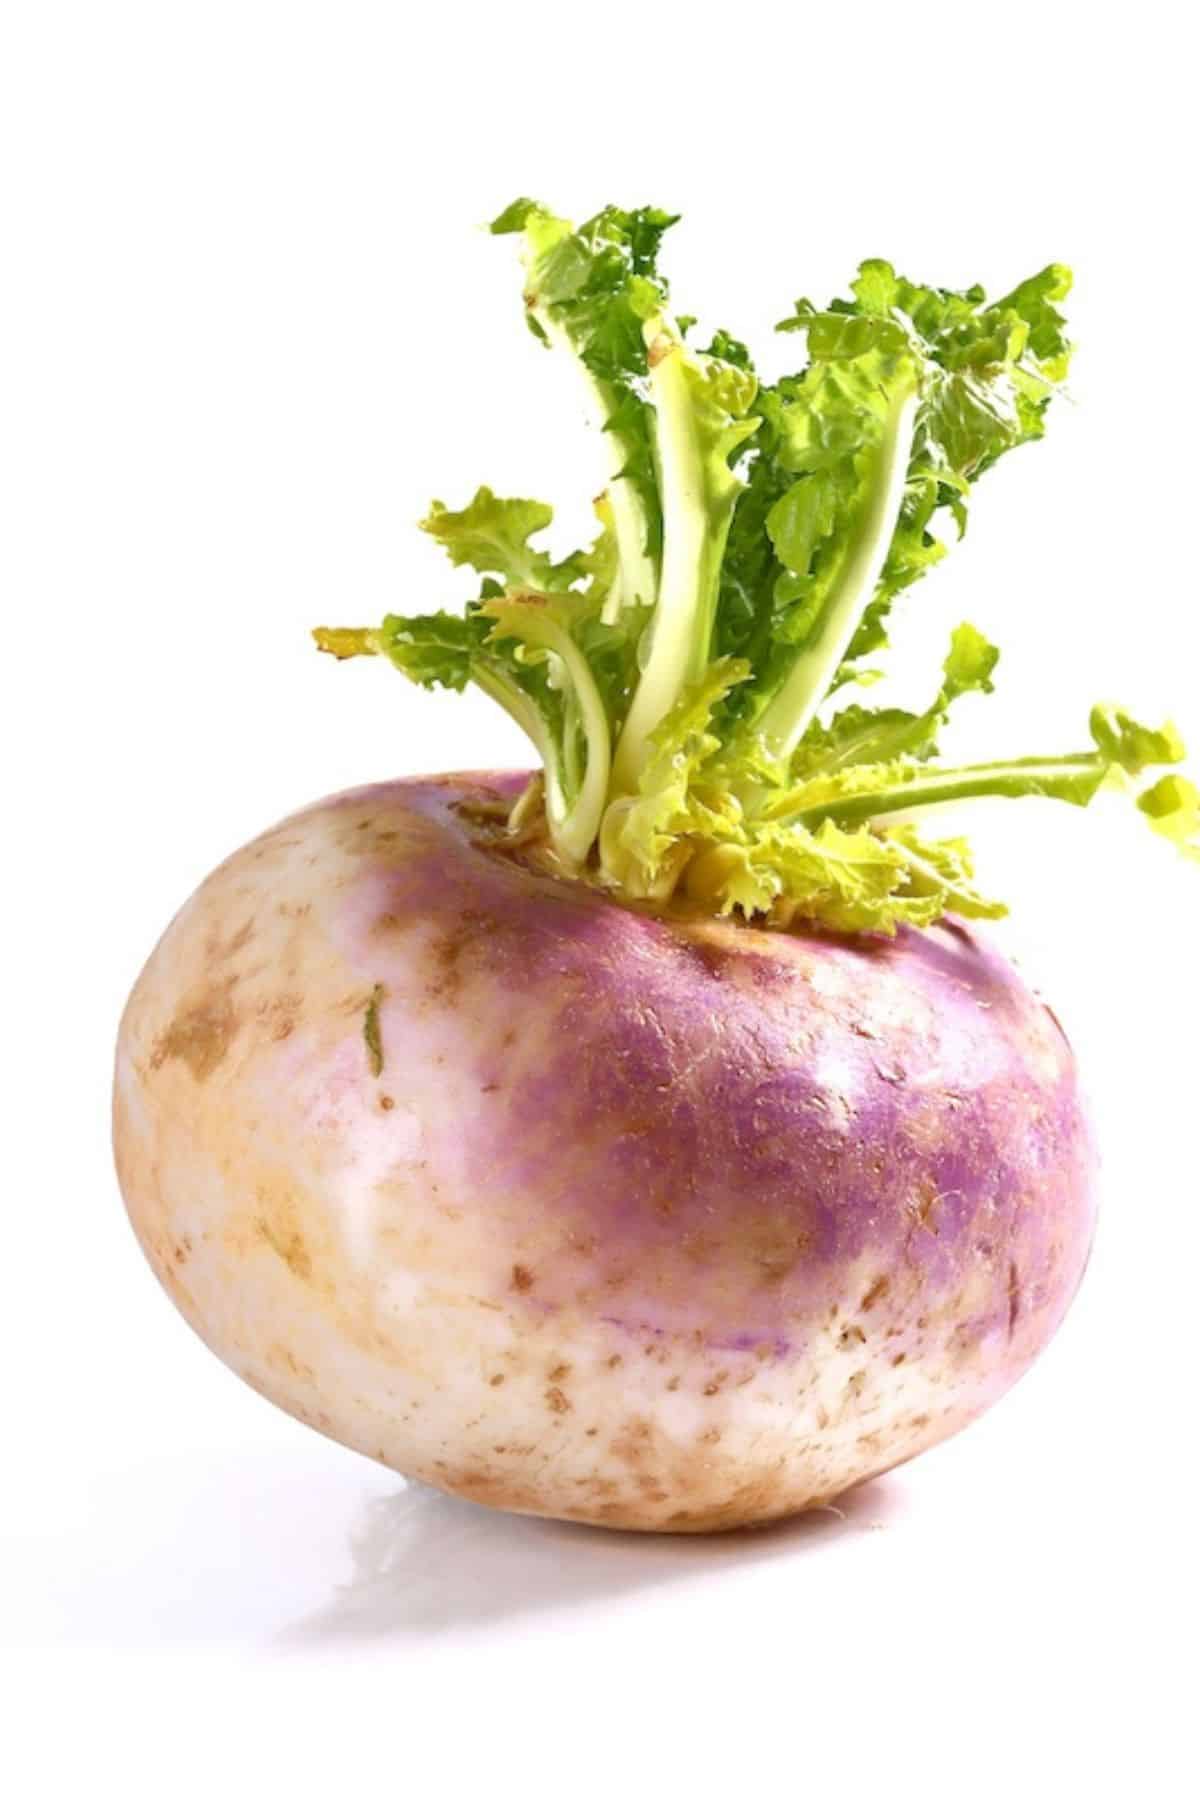 turnip with greens attached,